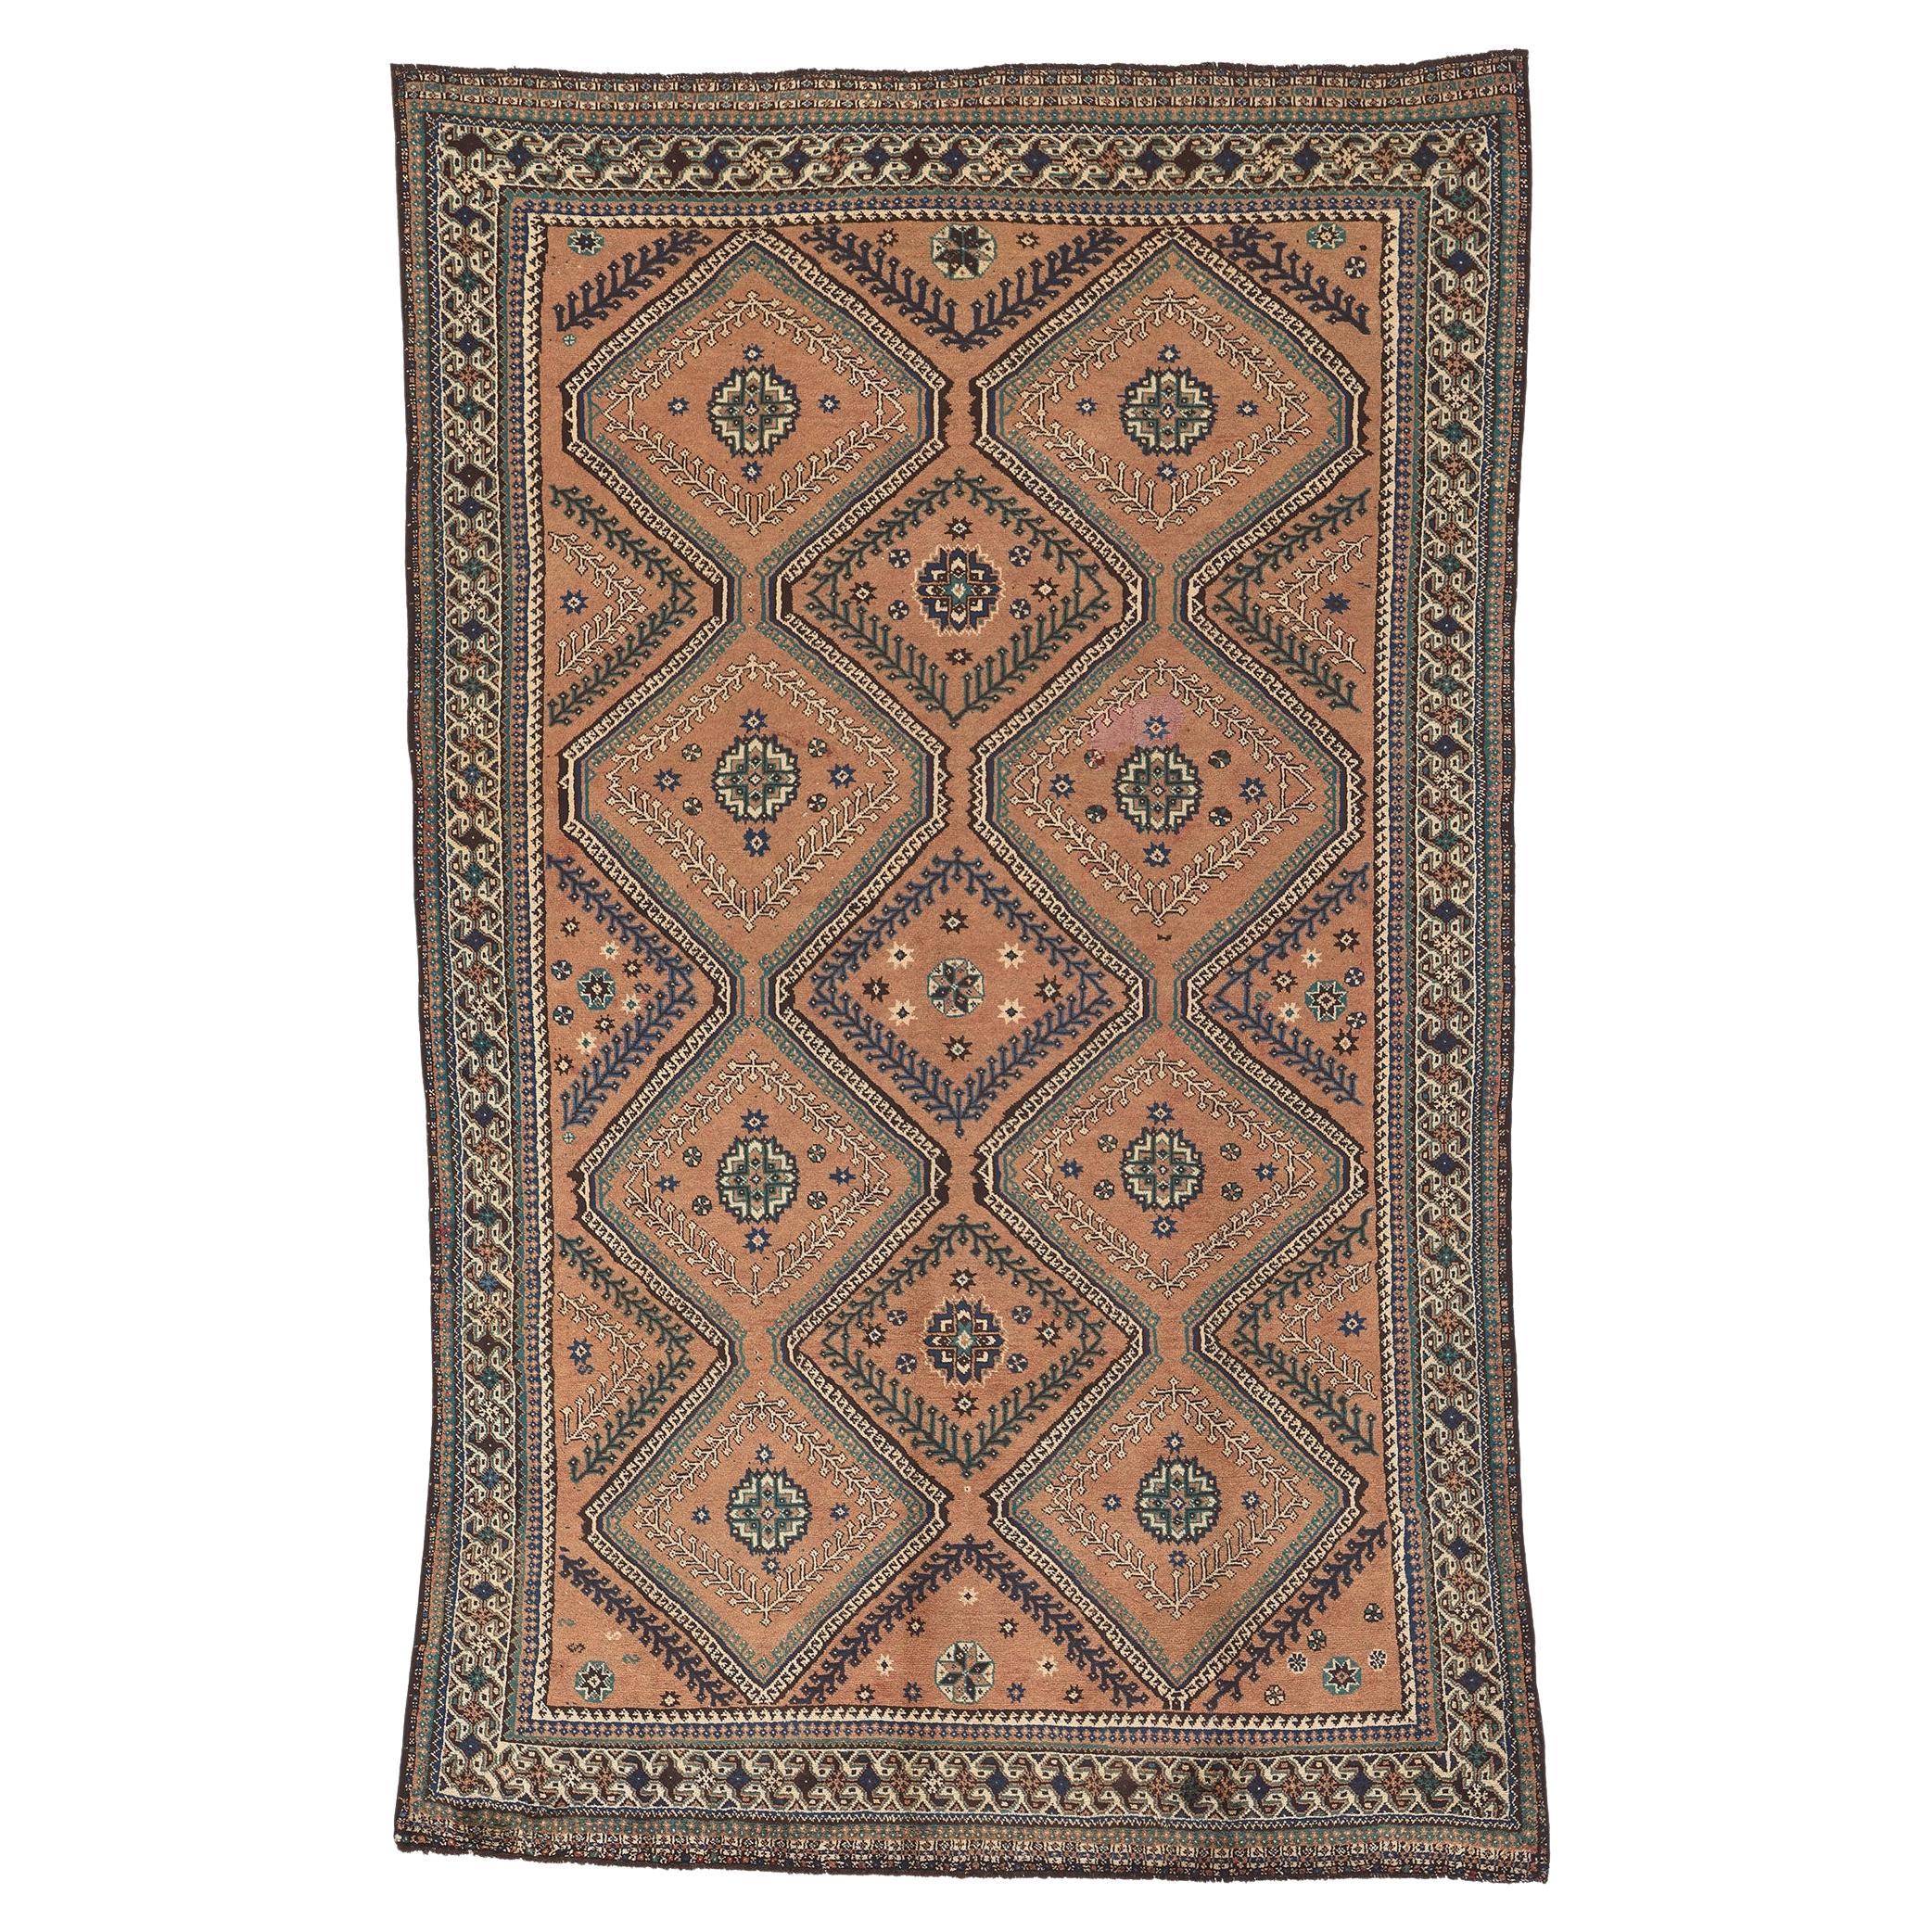 Earth-Tone Vintage Persian Shiraz Rug, Cozy Nomad Meets Beguiling Charm